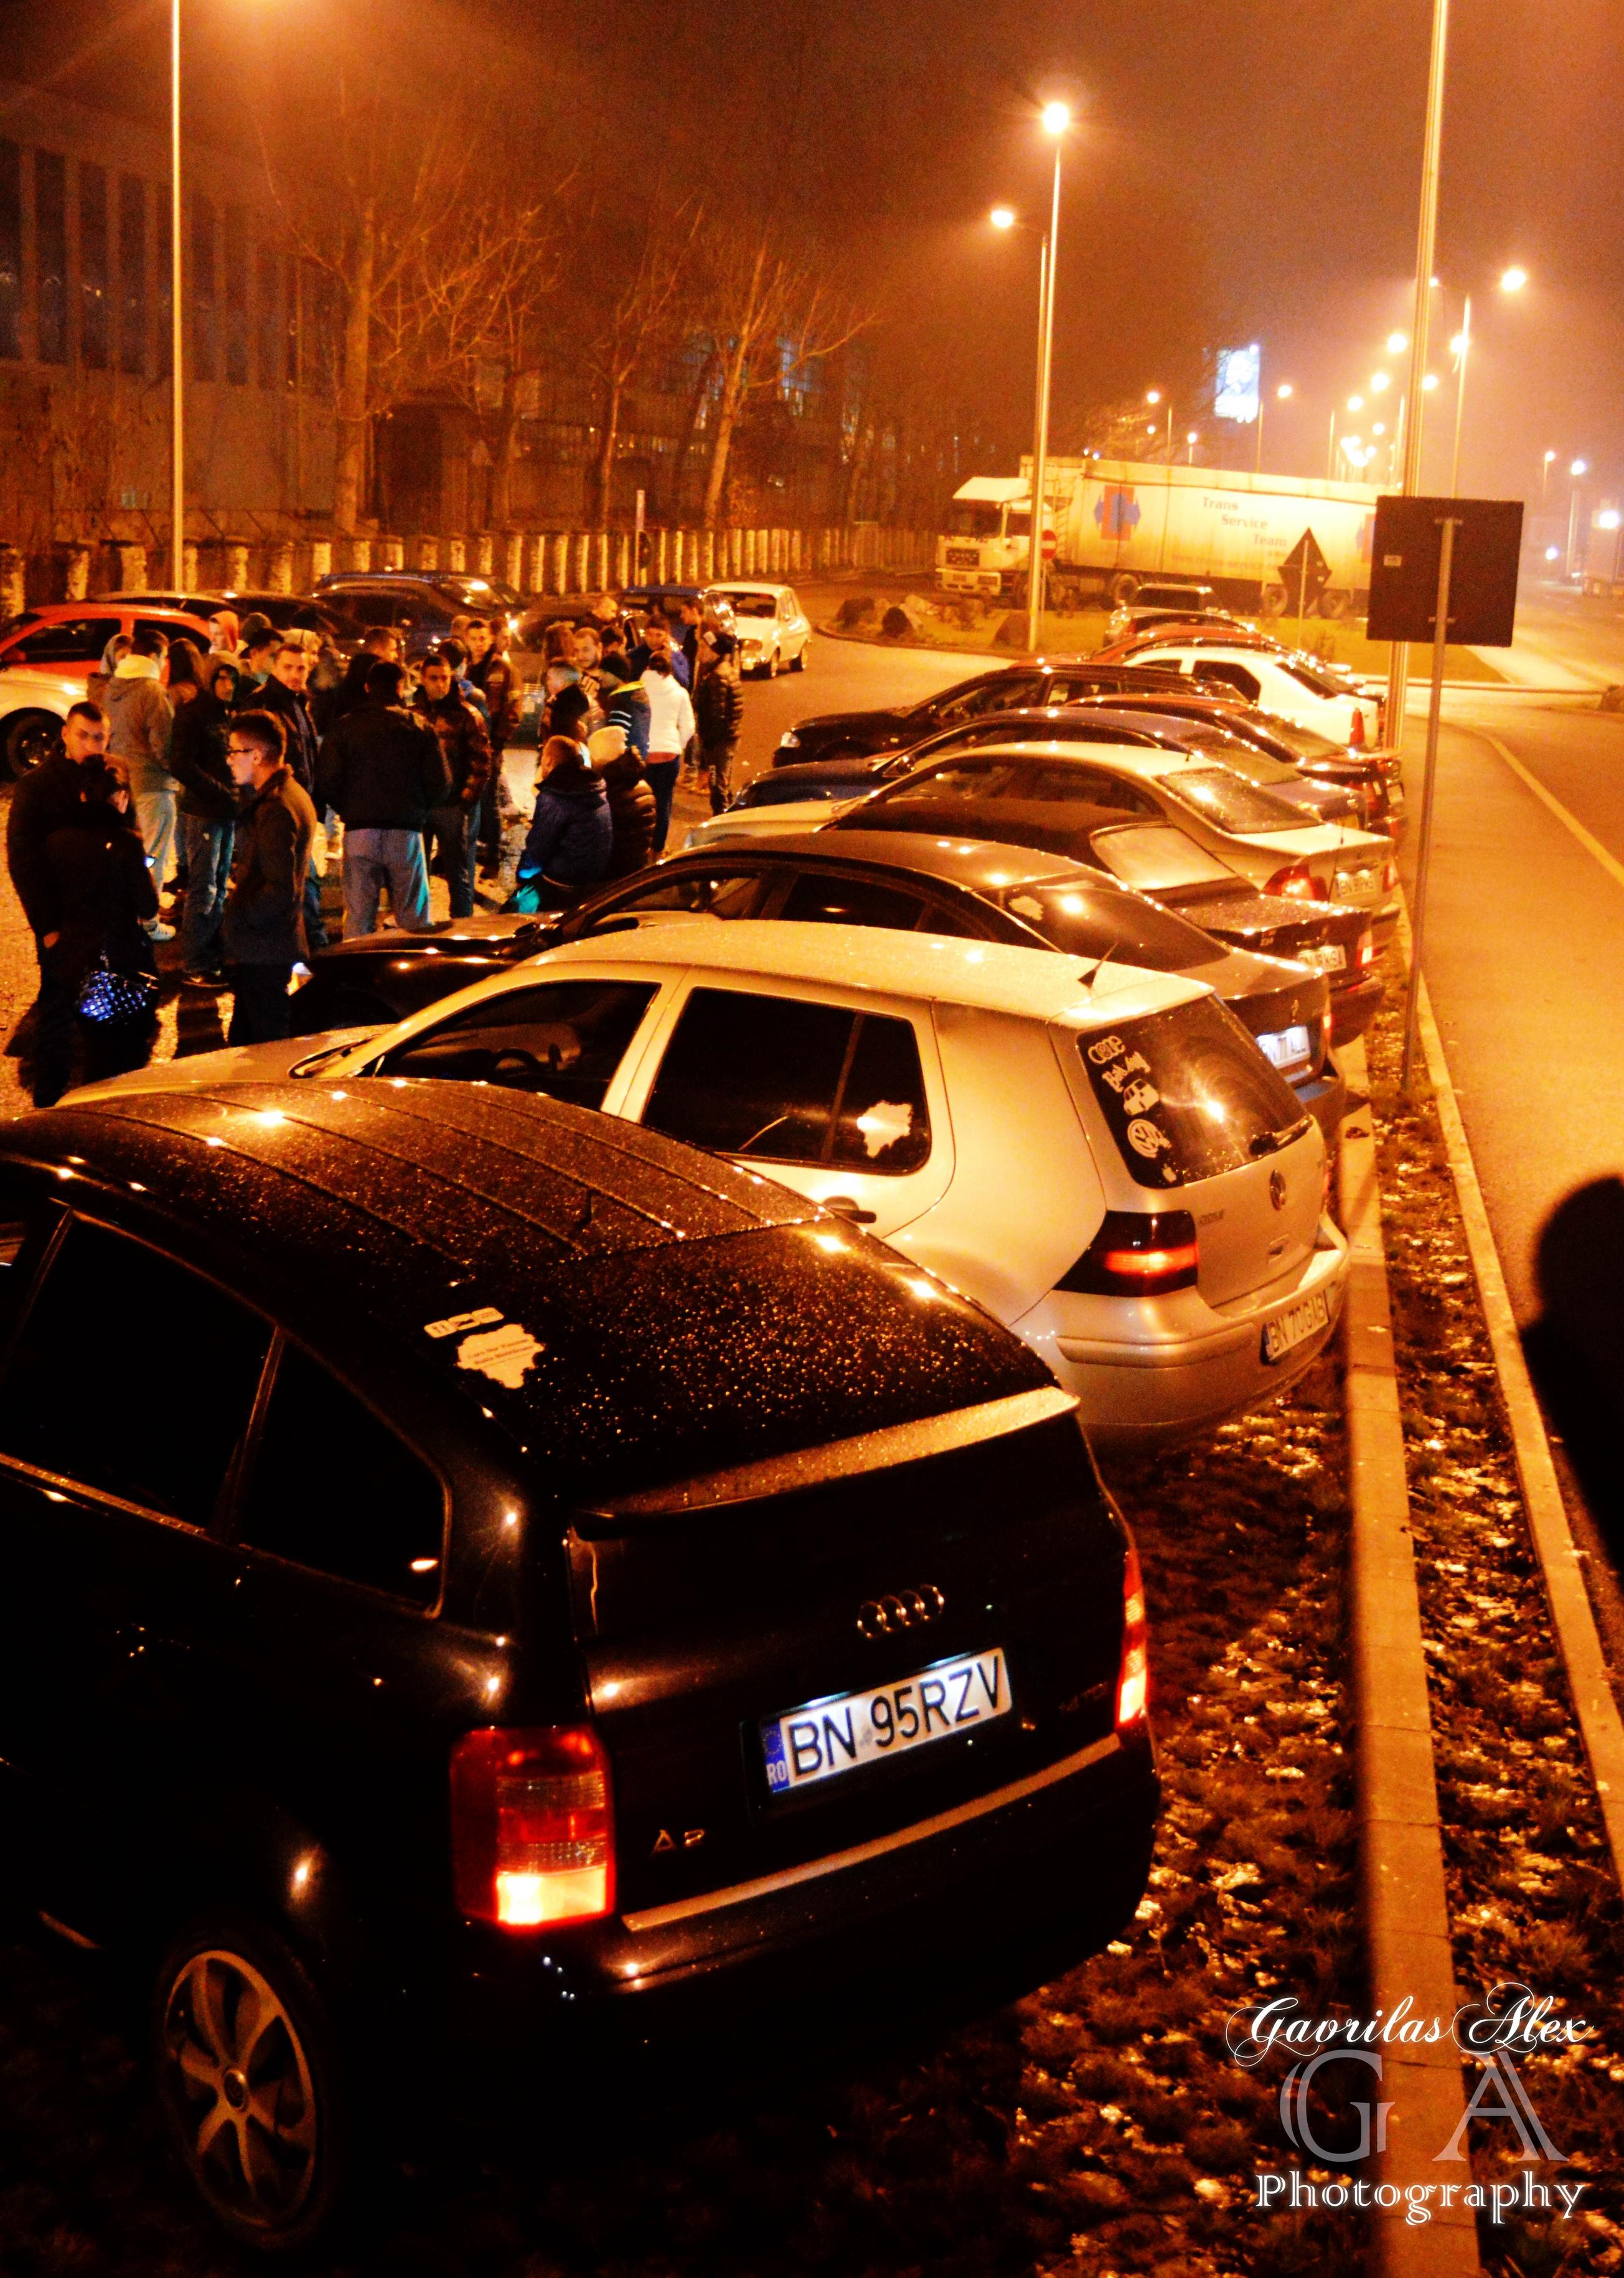 "Cars our passion"`s meet @ Romania 20.12.2014